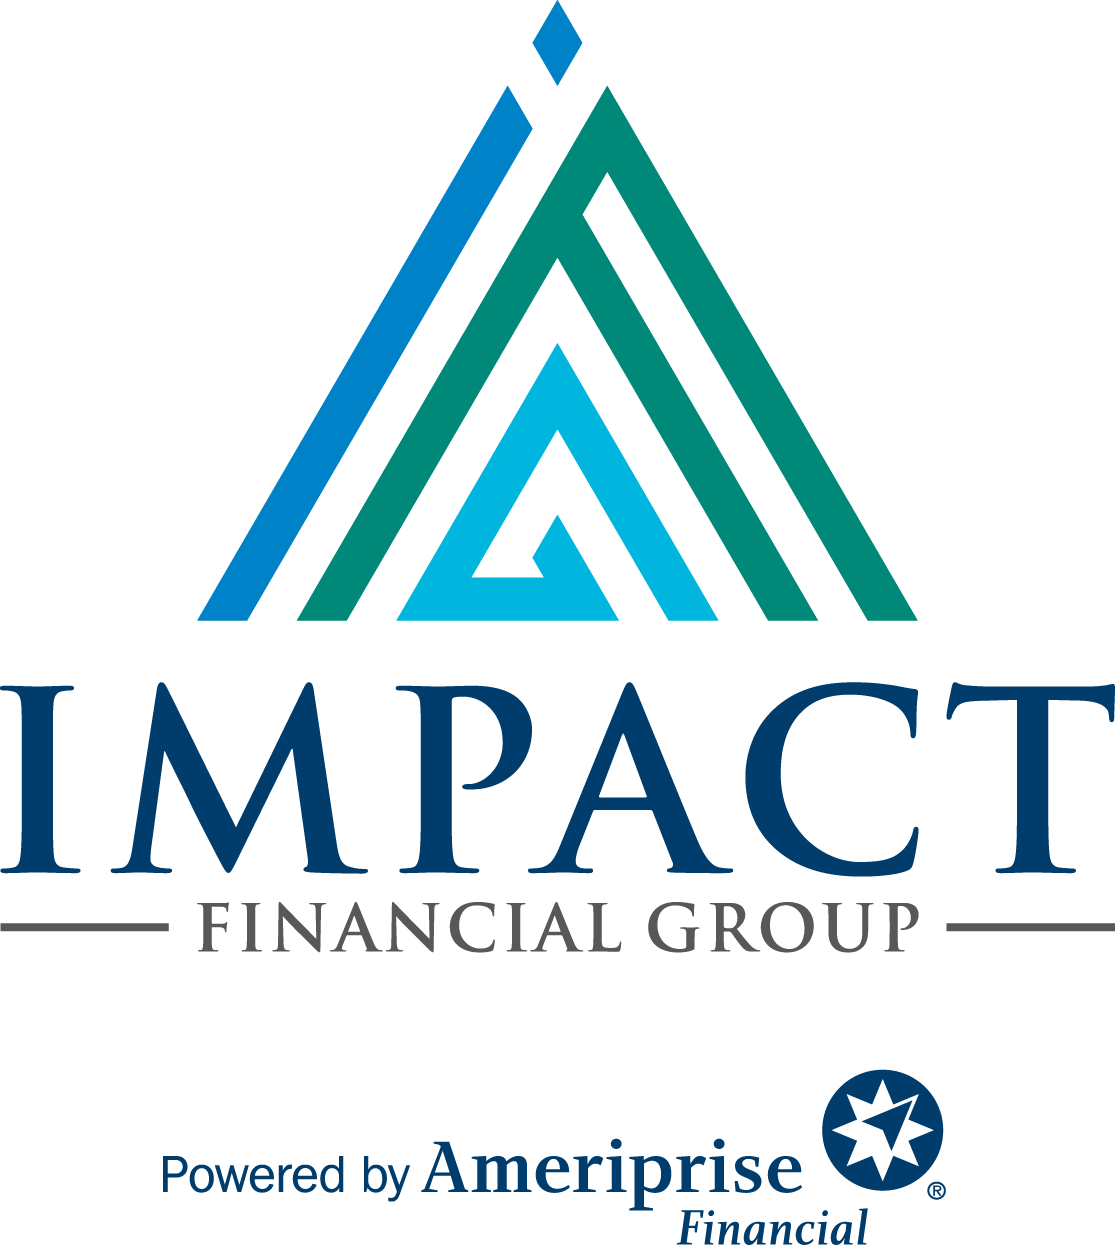 IMPACT FINANCIAL GROUP